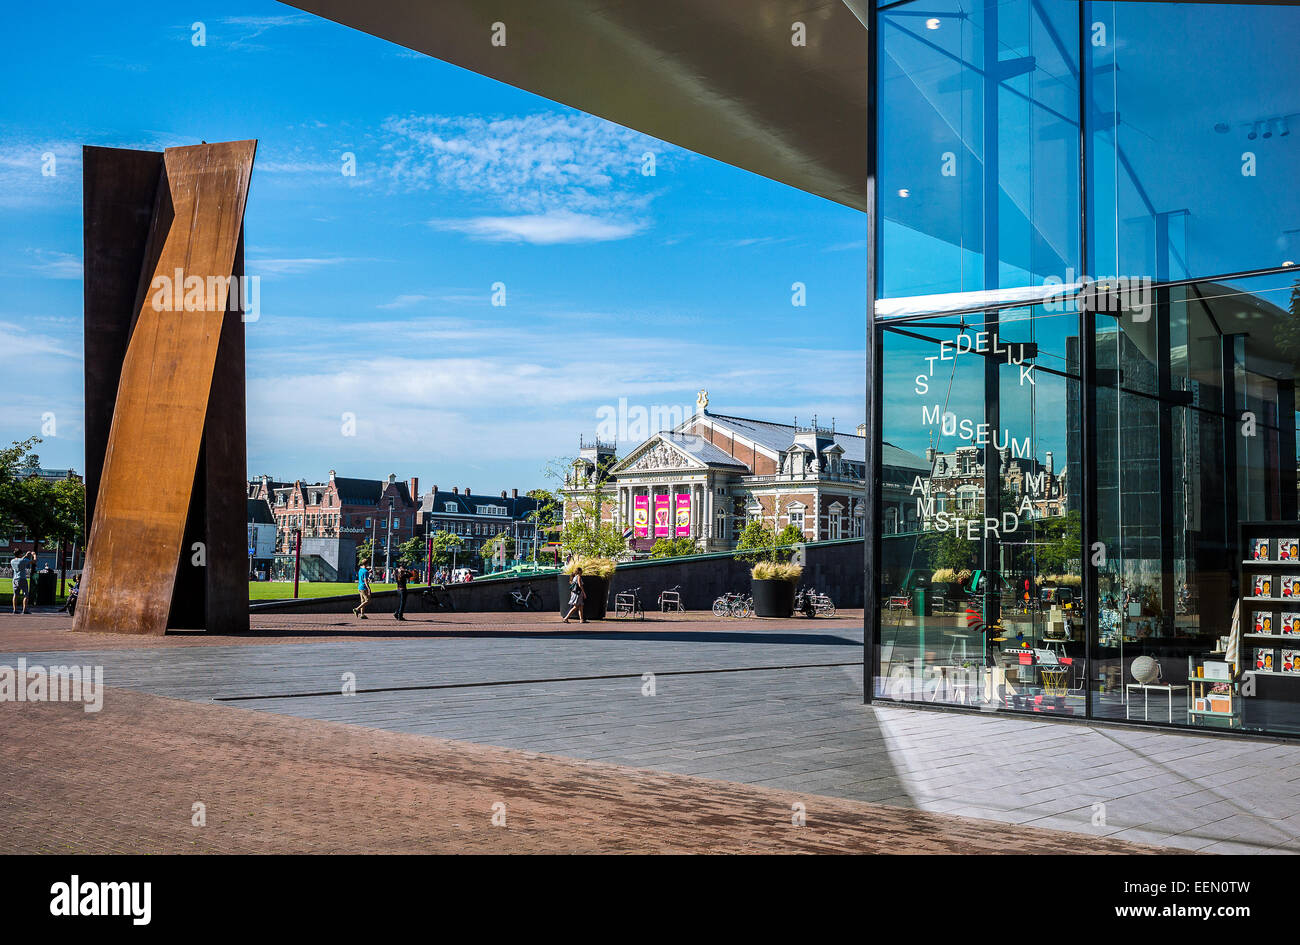 Amsterdam, people and architectures in the Museum plain Stock Photo